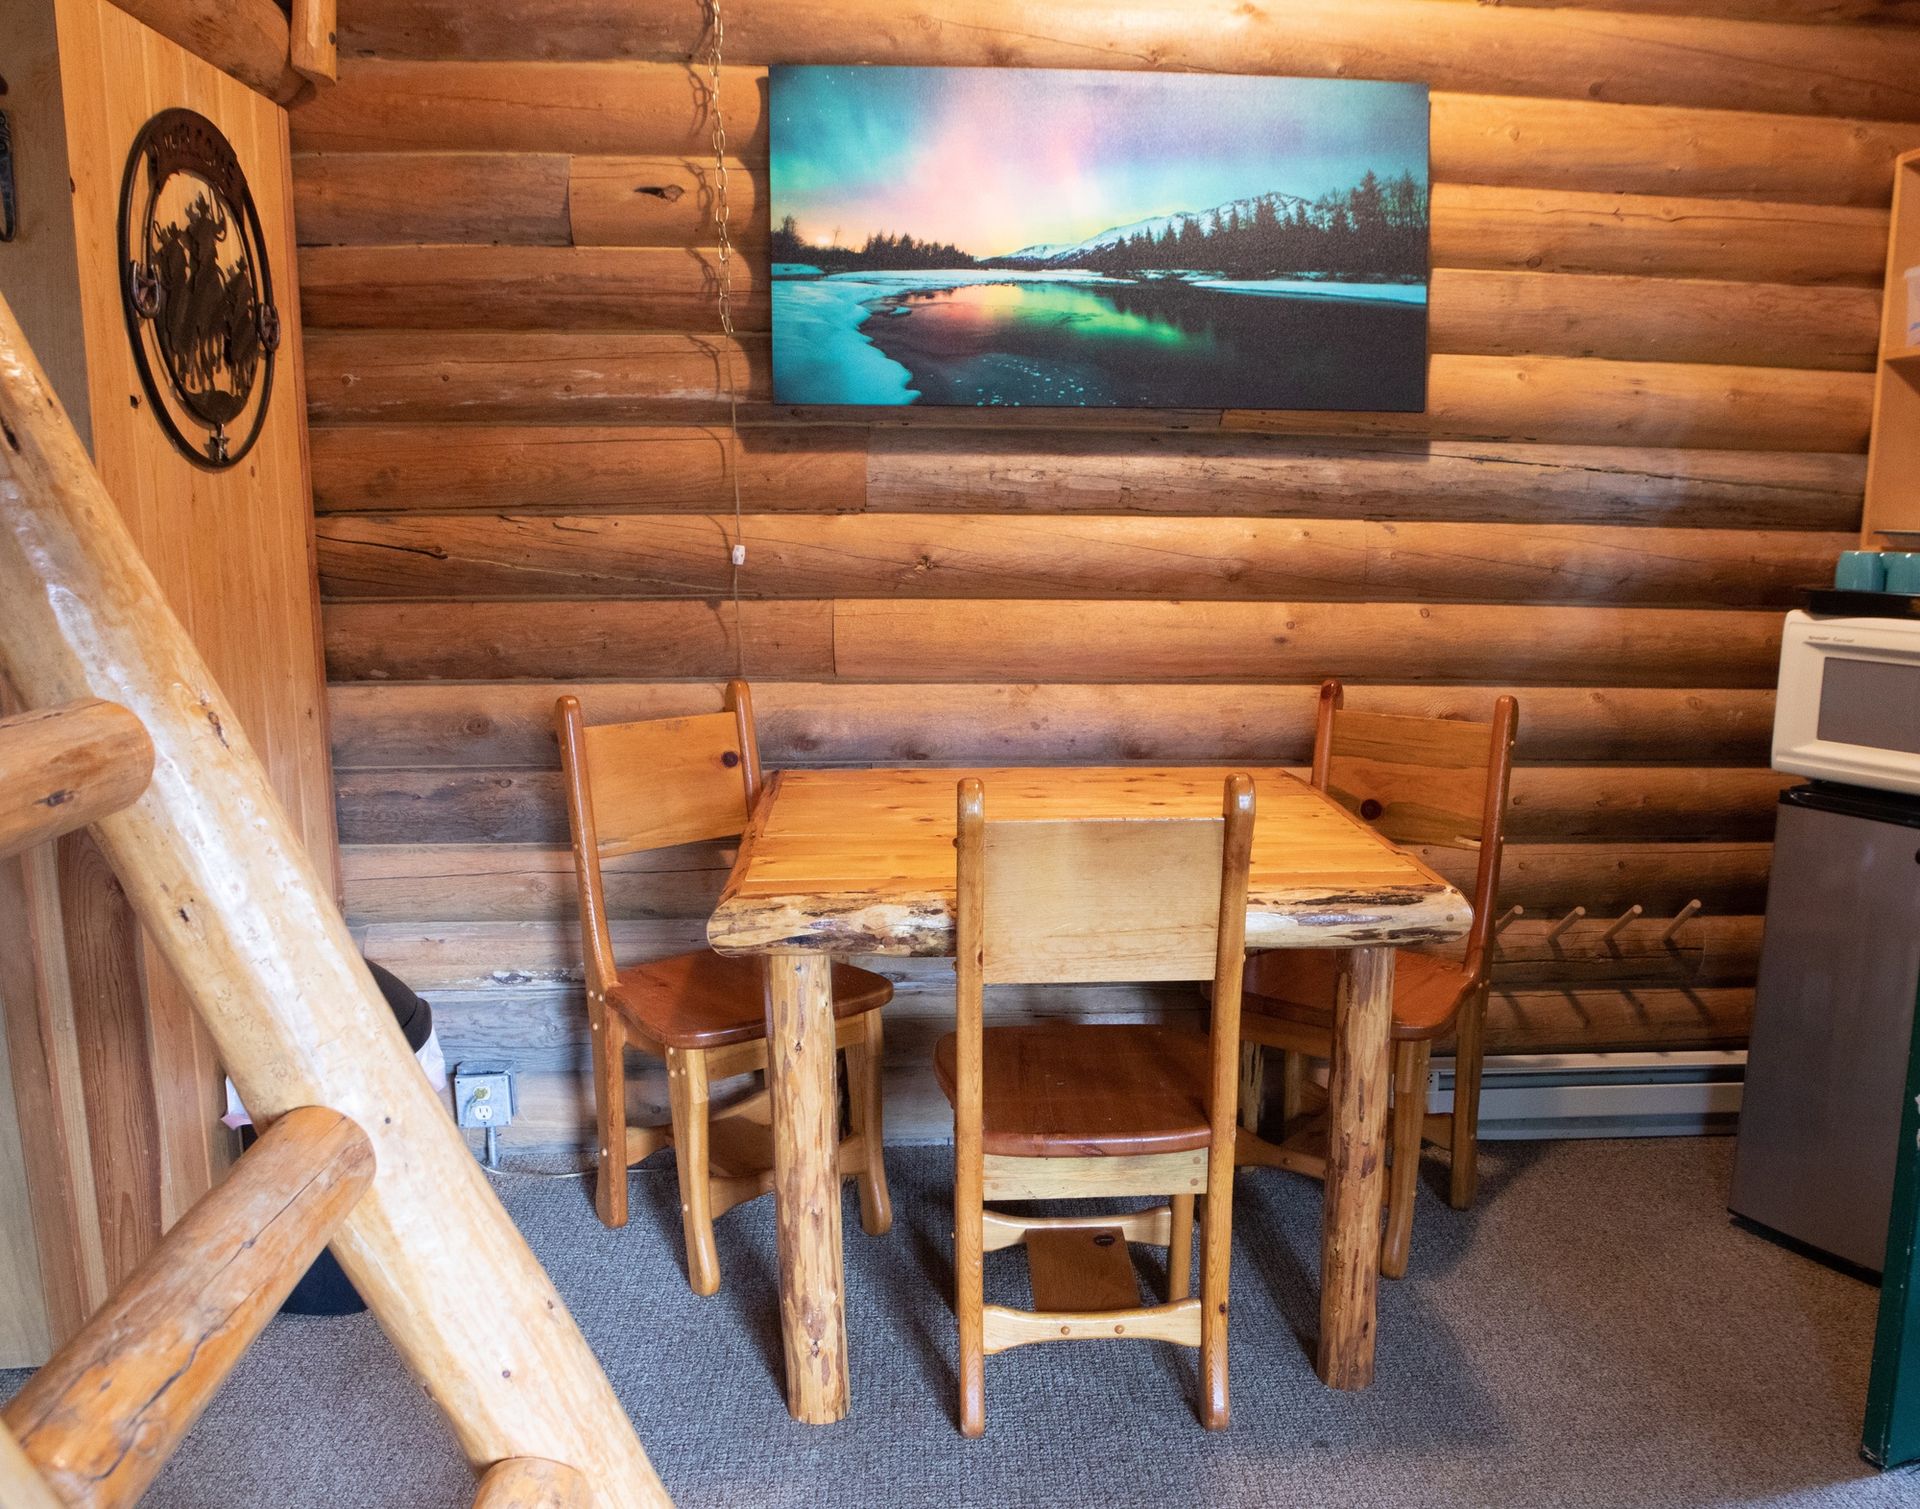 A wooden table and chairs in a log cabin with a painting on the wall.